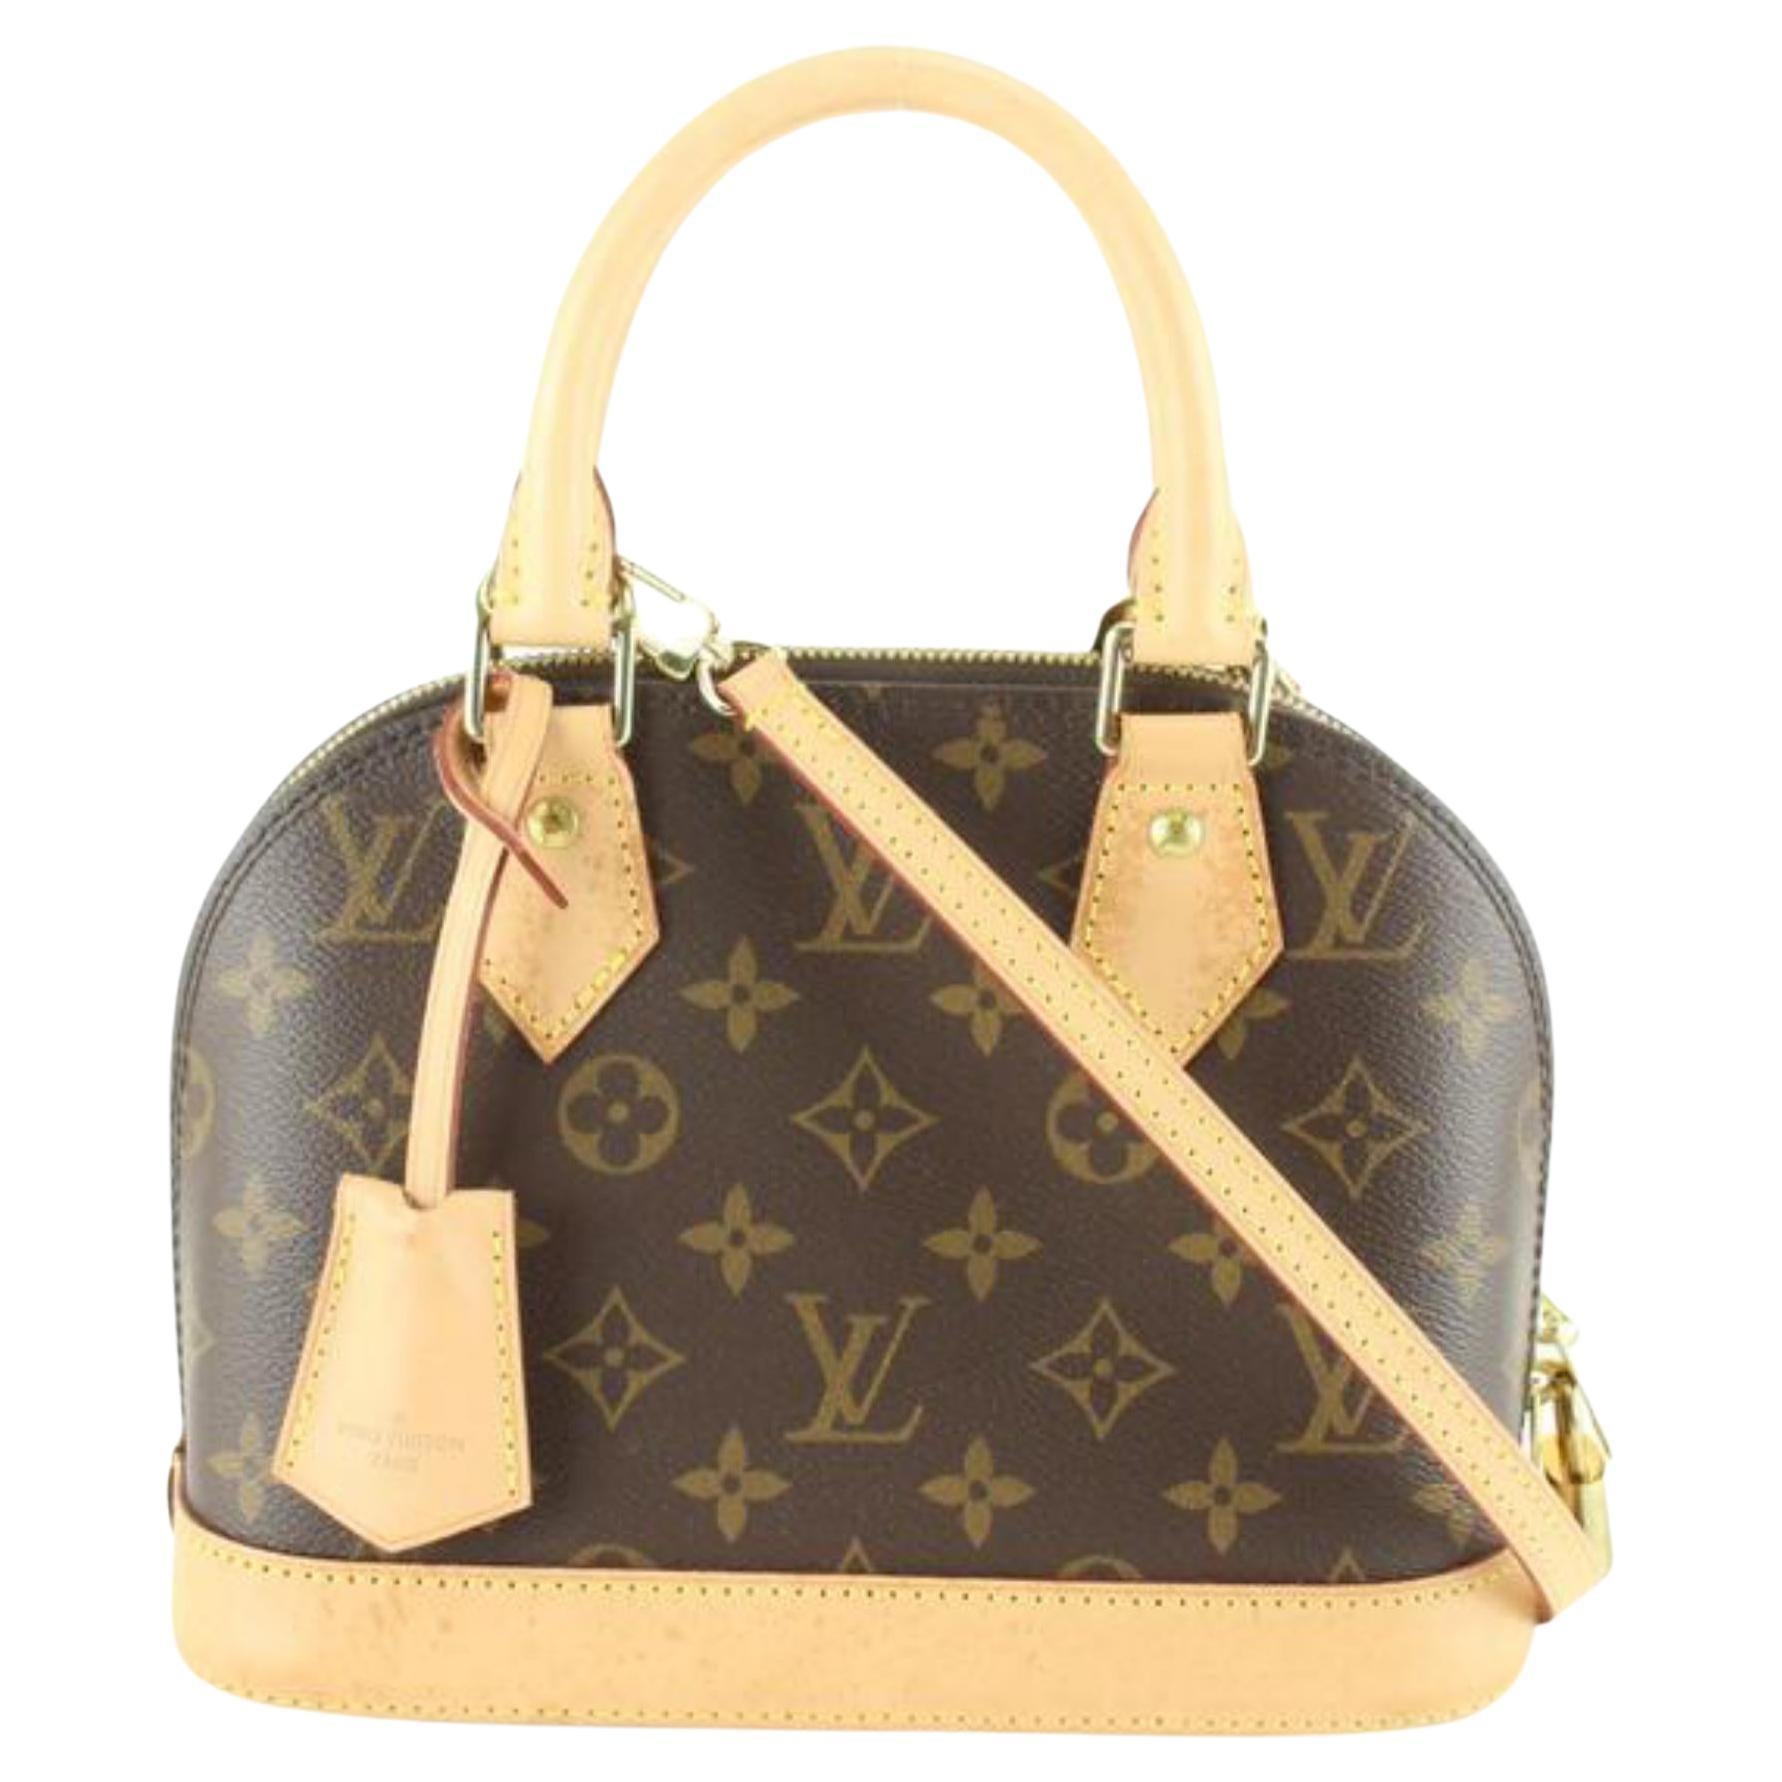 Louis Vuitton Alma Bb Serial Number - 4 For Sale on 1stDibs